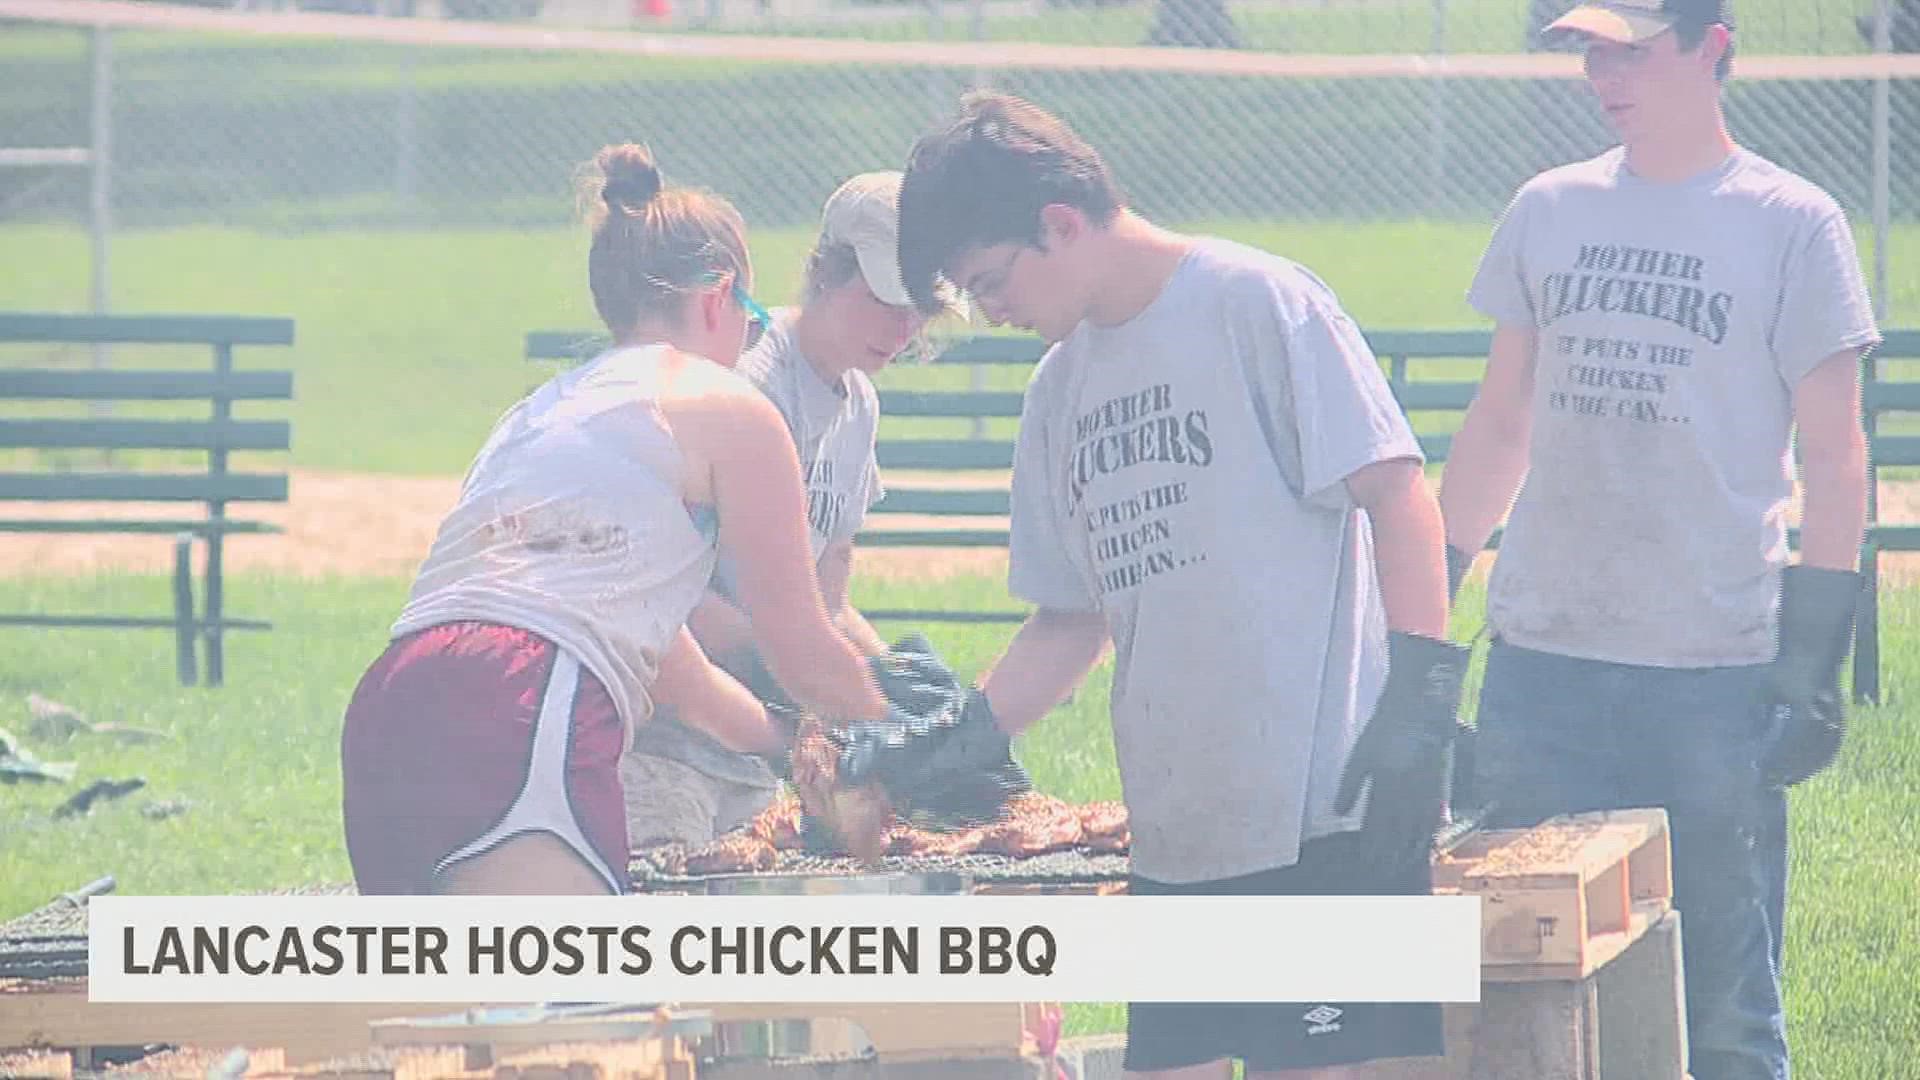 Over 15,000 chicken dinners given out during the World's Largest Chicken BBQ in Lancaster County.